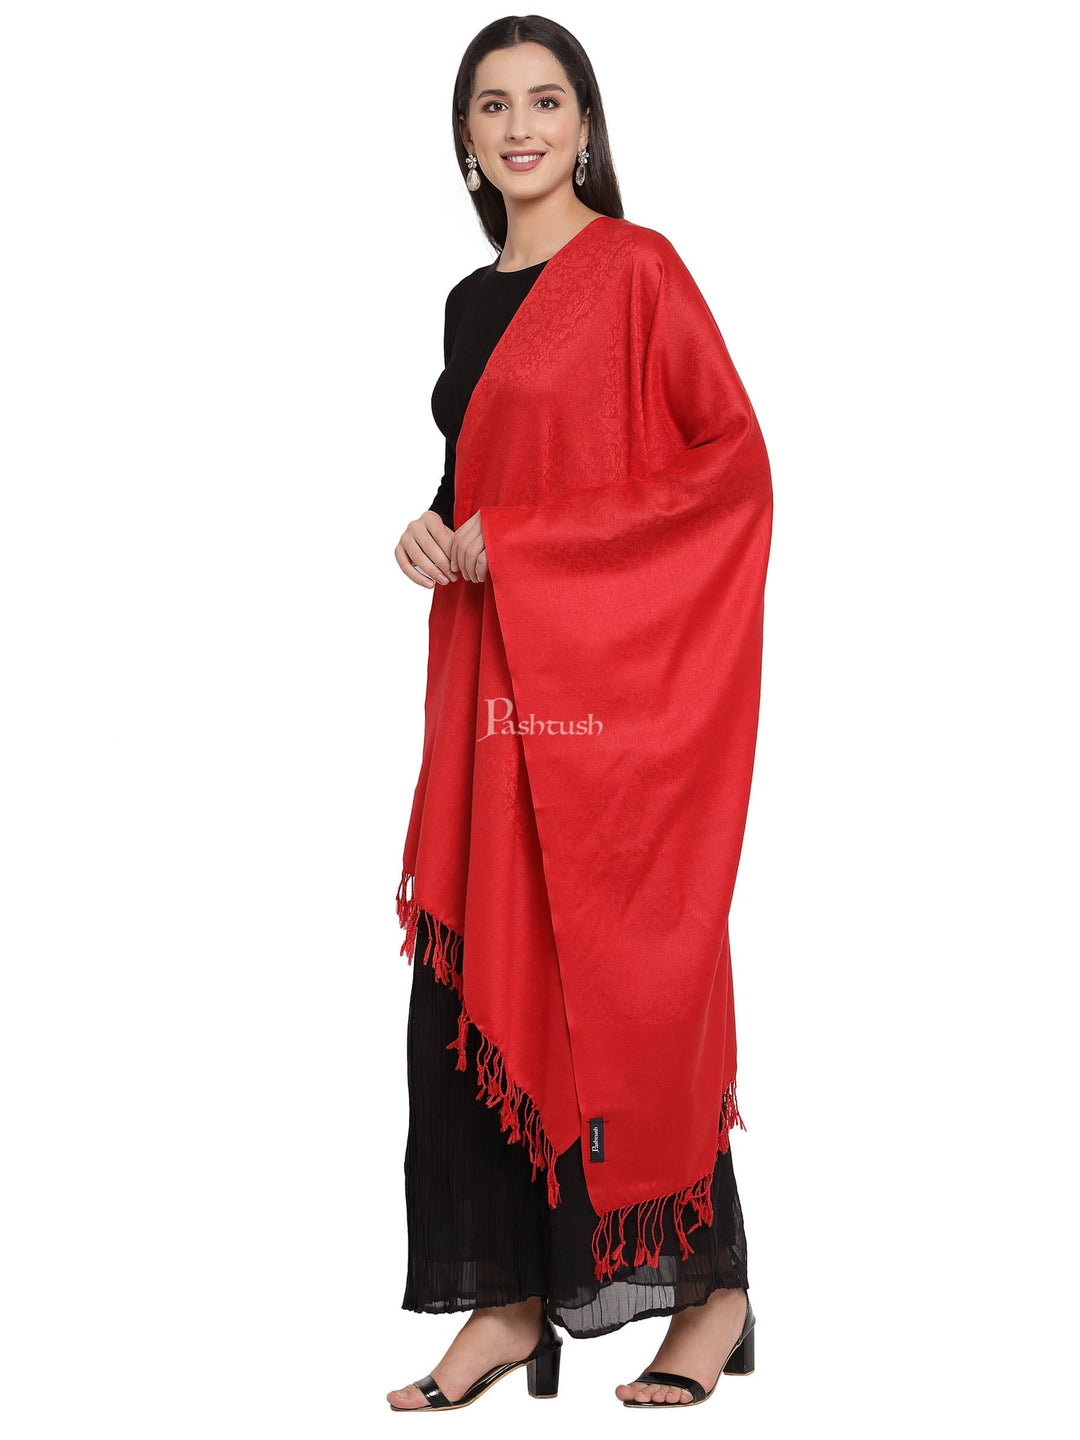 Pashtush India Womens Stoles and Scarves Scarf Pashtush Womens Extra Fine Wool Scarf, Stole, Scarlet Red (Solid Colour)